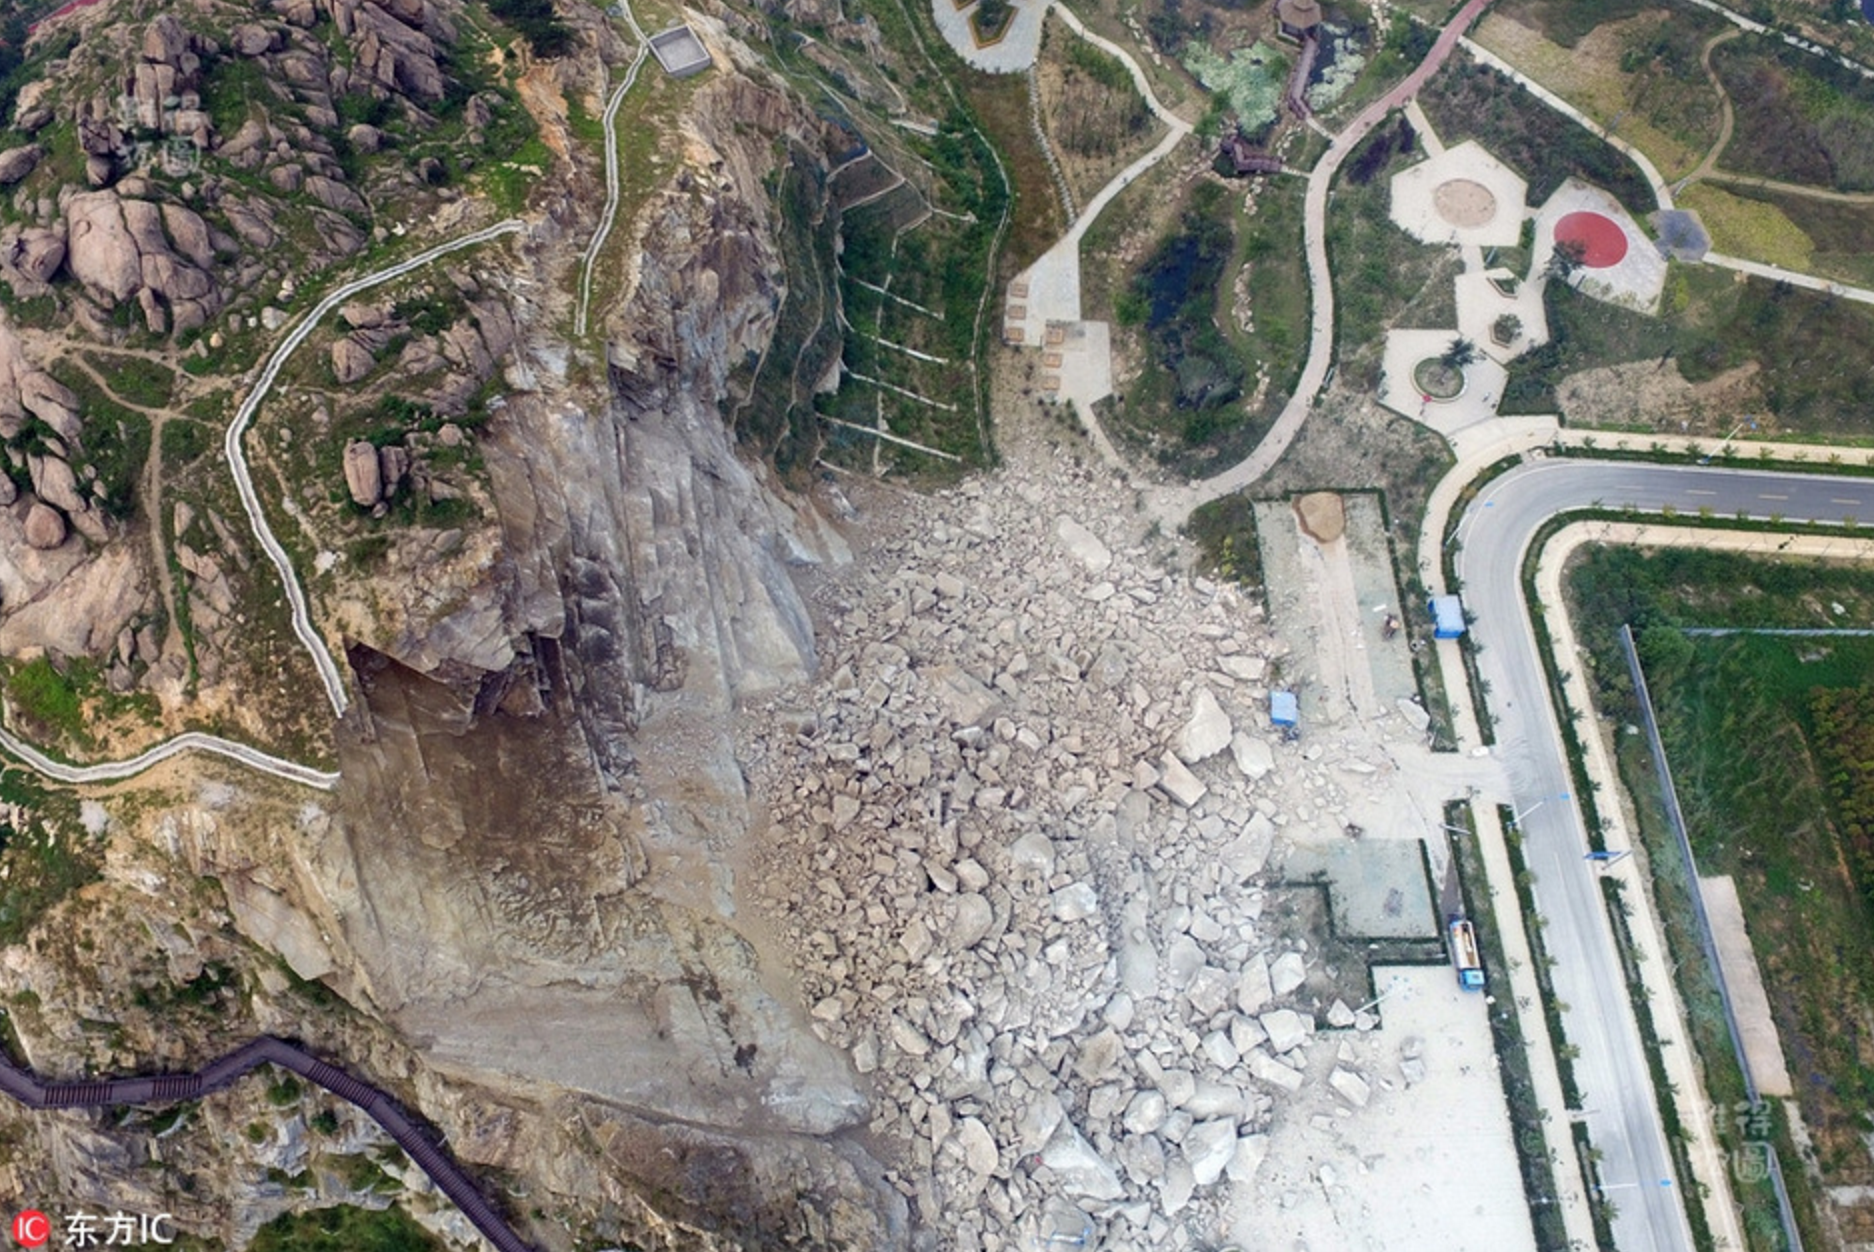 Giant Rockslide Slams Into Park Just Days Before Opening